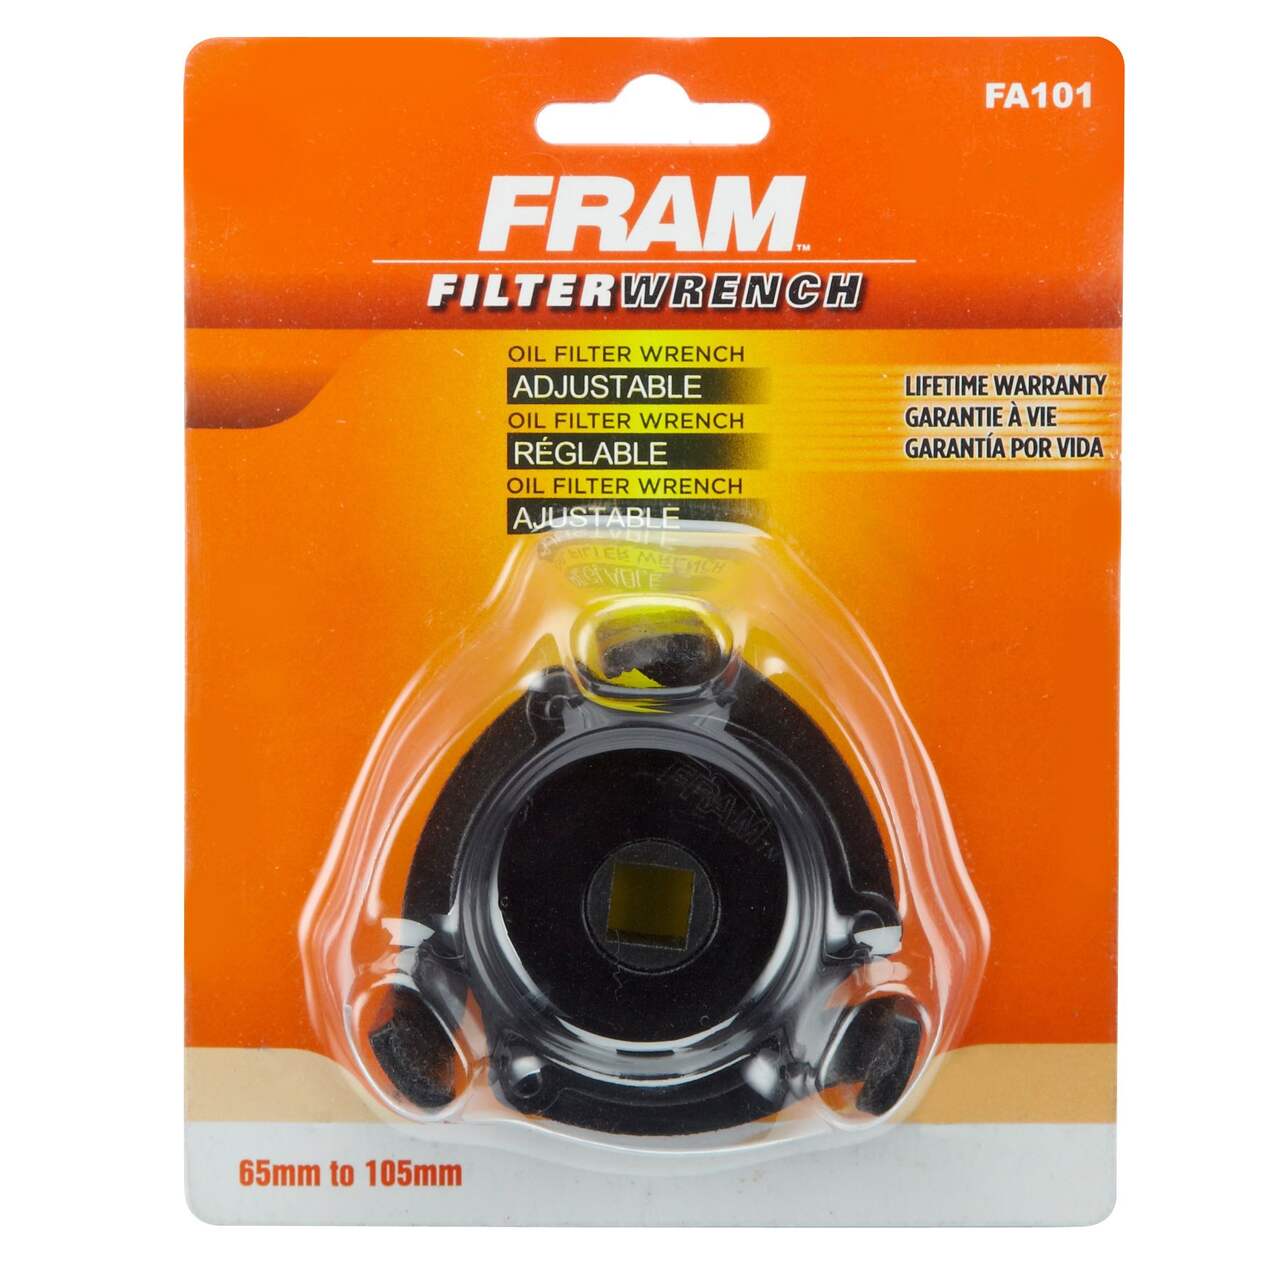 https://media-www.canadiantire.ca/product/automotive/auto-maintenance/oil-change-and-fuel-accessories/0283542/fram-3-arm-fully-adjustable-oil-filter-cap-wrench-96c0b8fc-1983-4770-8996-f4552c81f047-jpgrendition.jpg?imdensity=1&imwidth=640&impolicy=mZoom